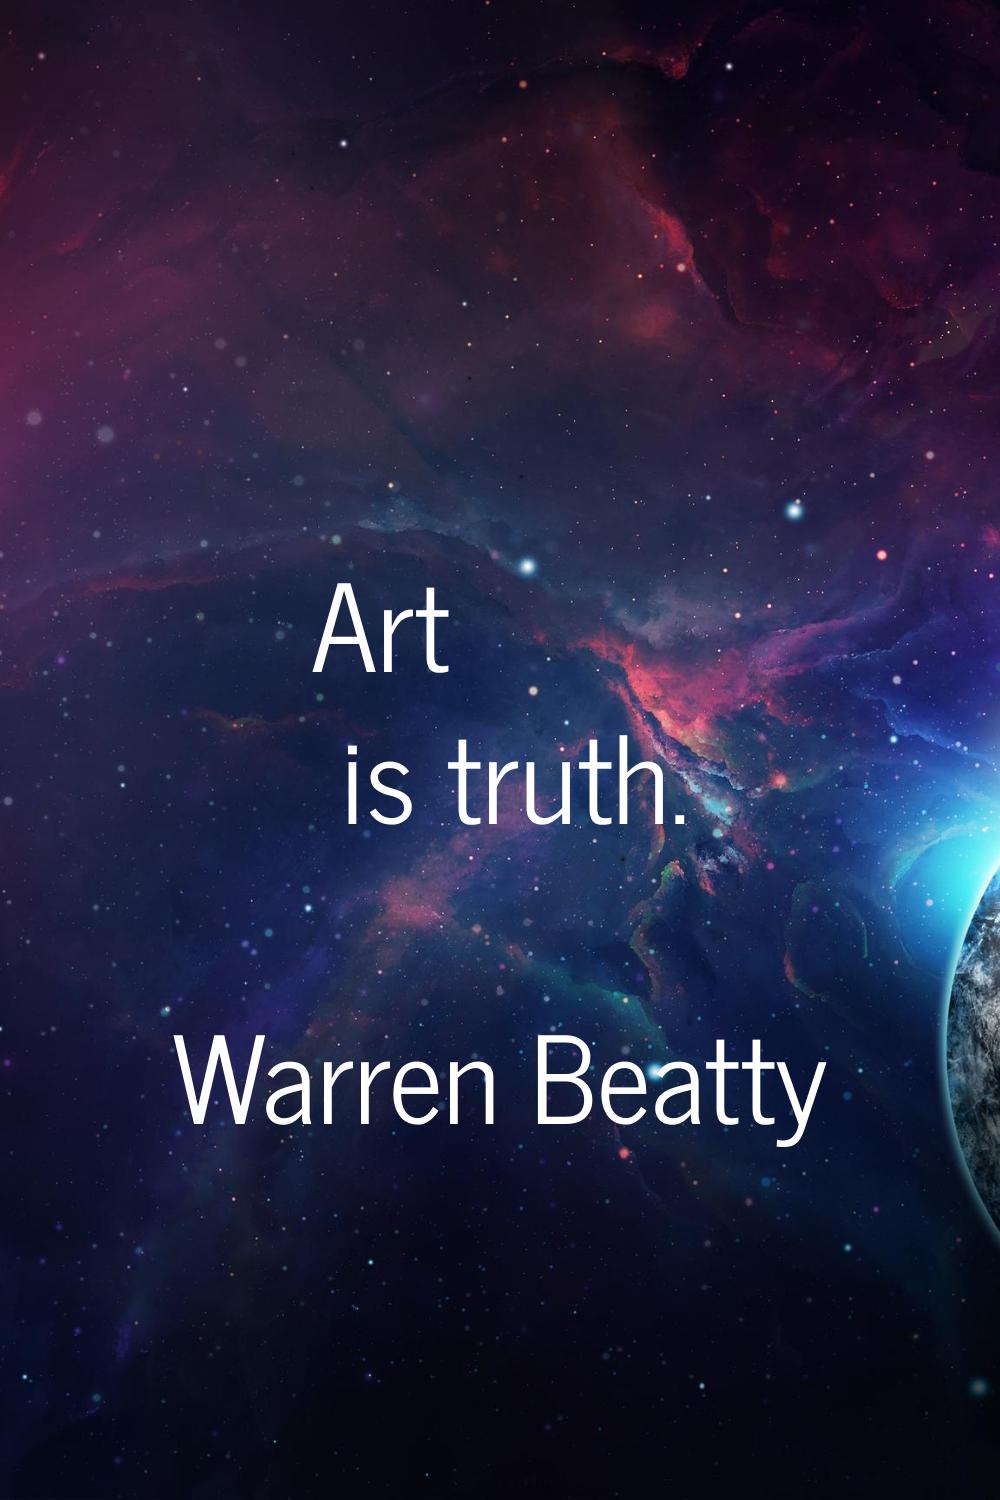 Art is truth.